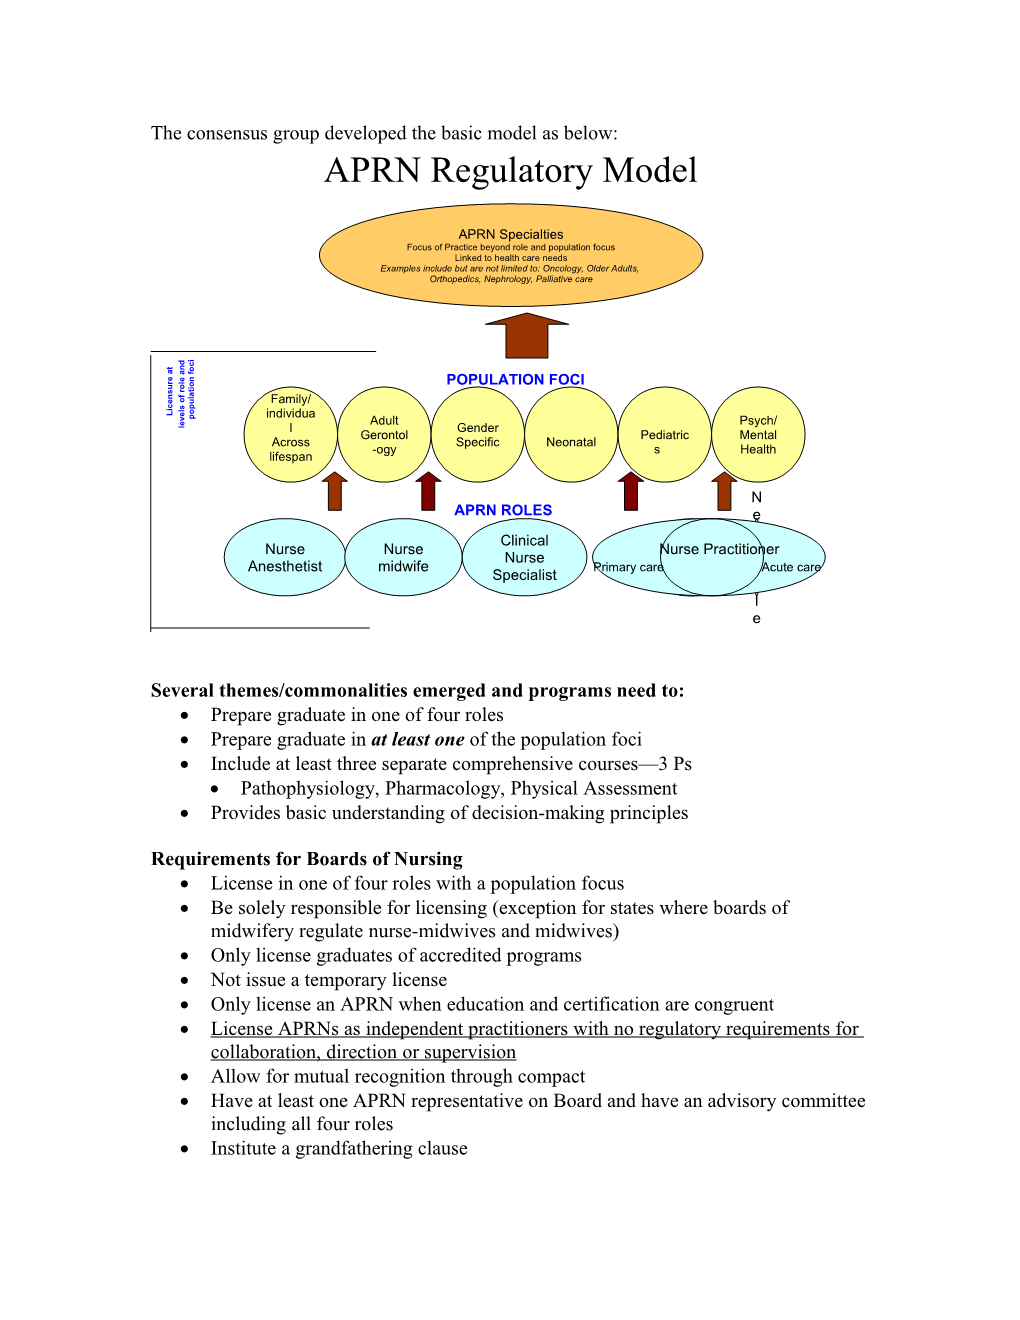 Consensus Model for Aprn Regulation: Licensure, Accreditation, Certification, Education